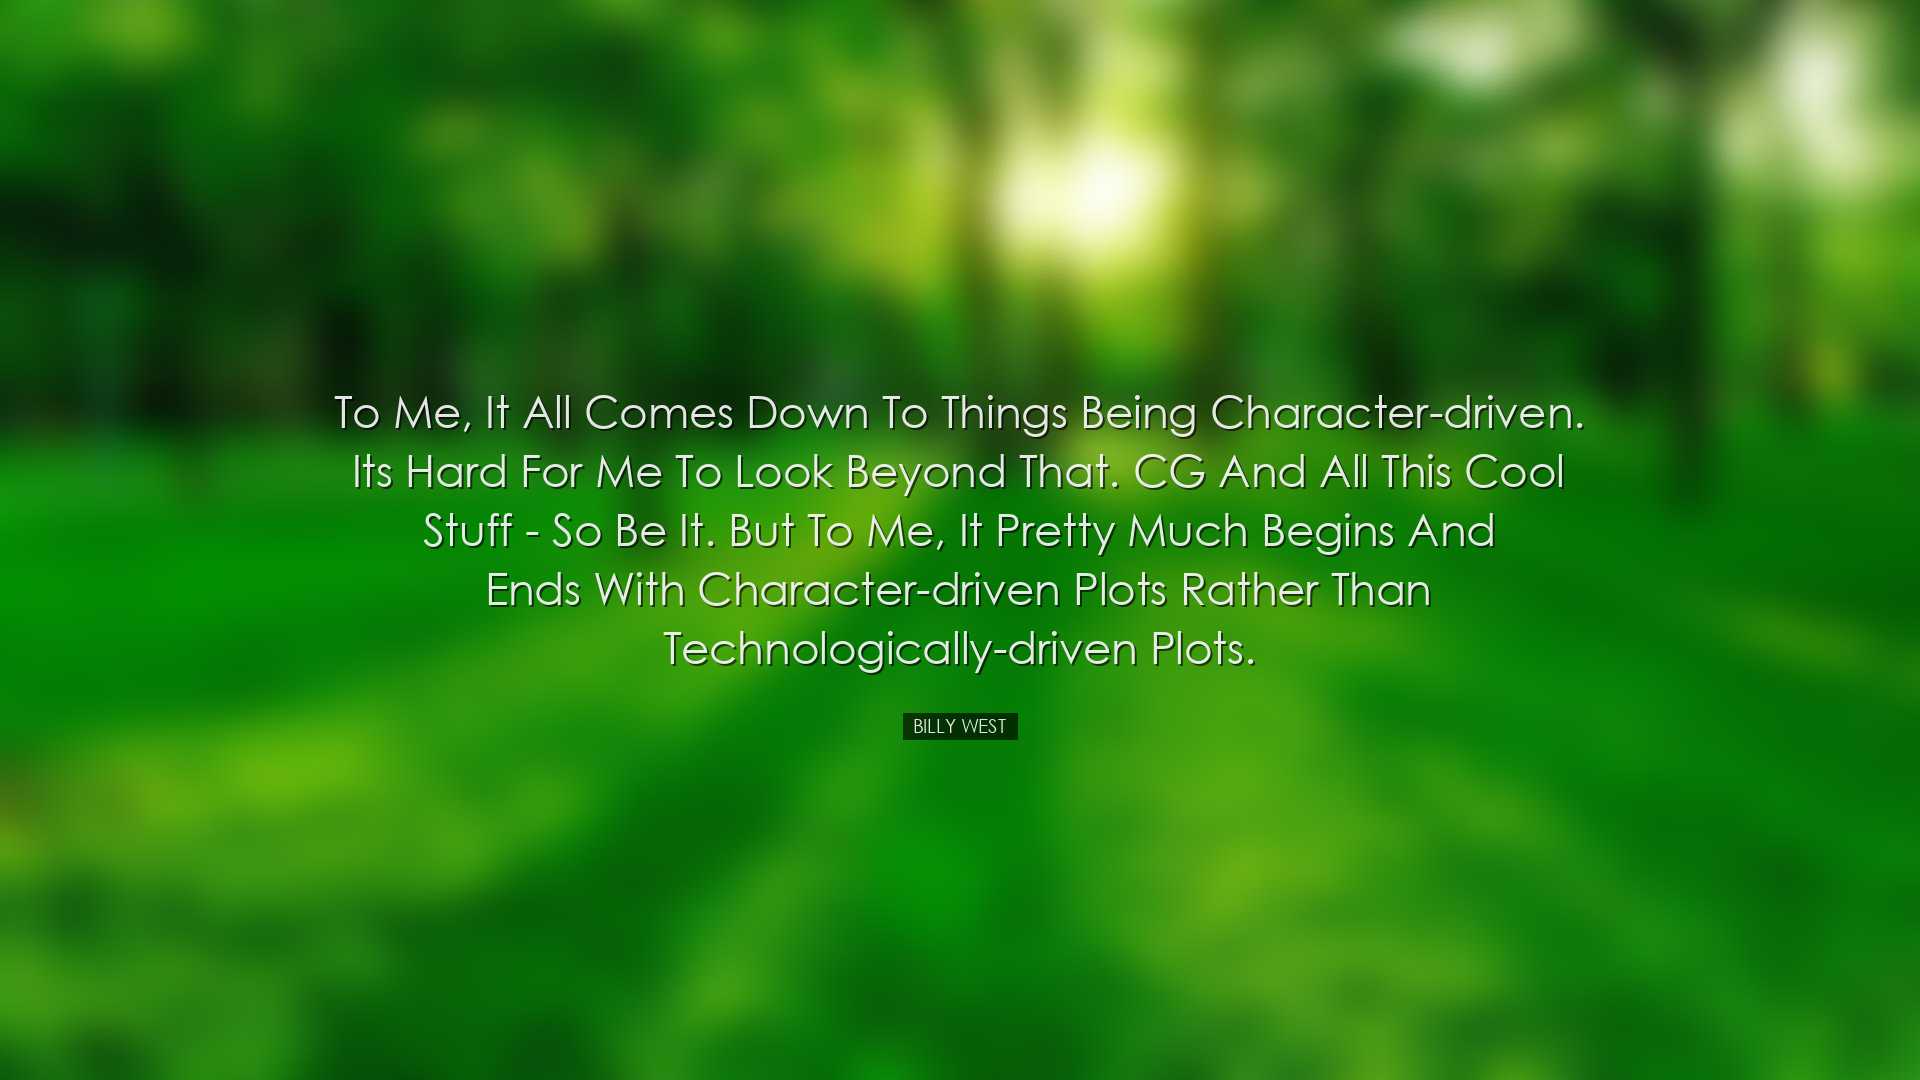 To me, it all comes down to things being character-driven. Its har